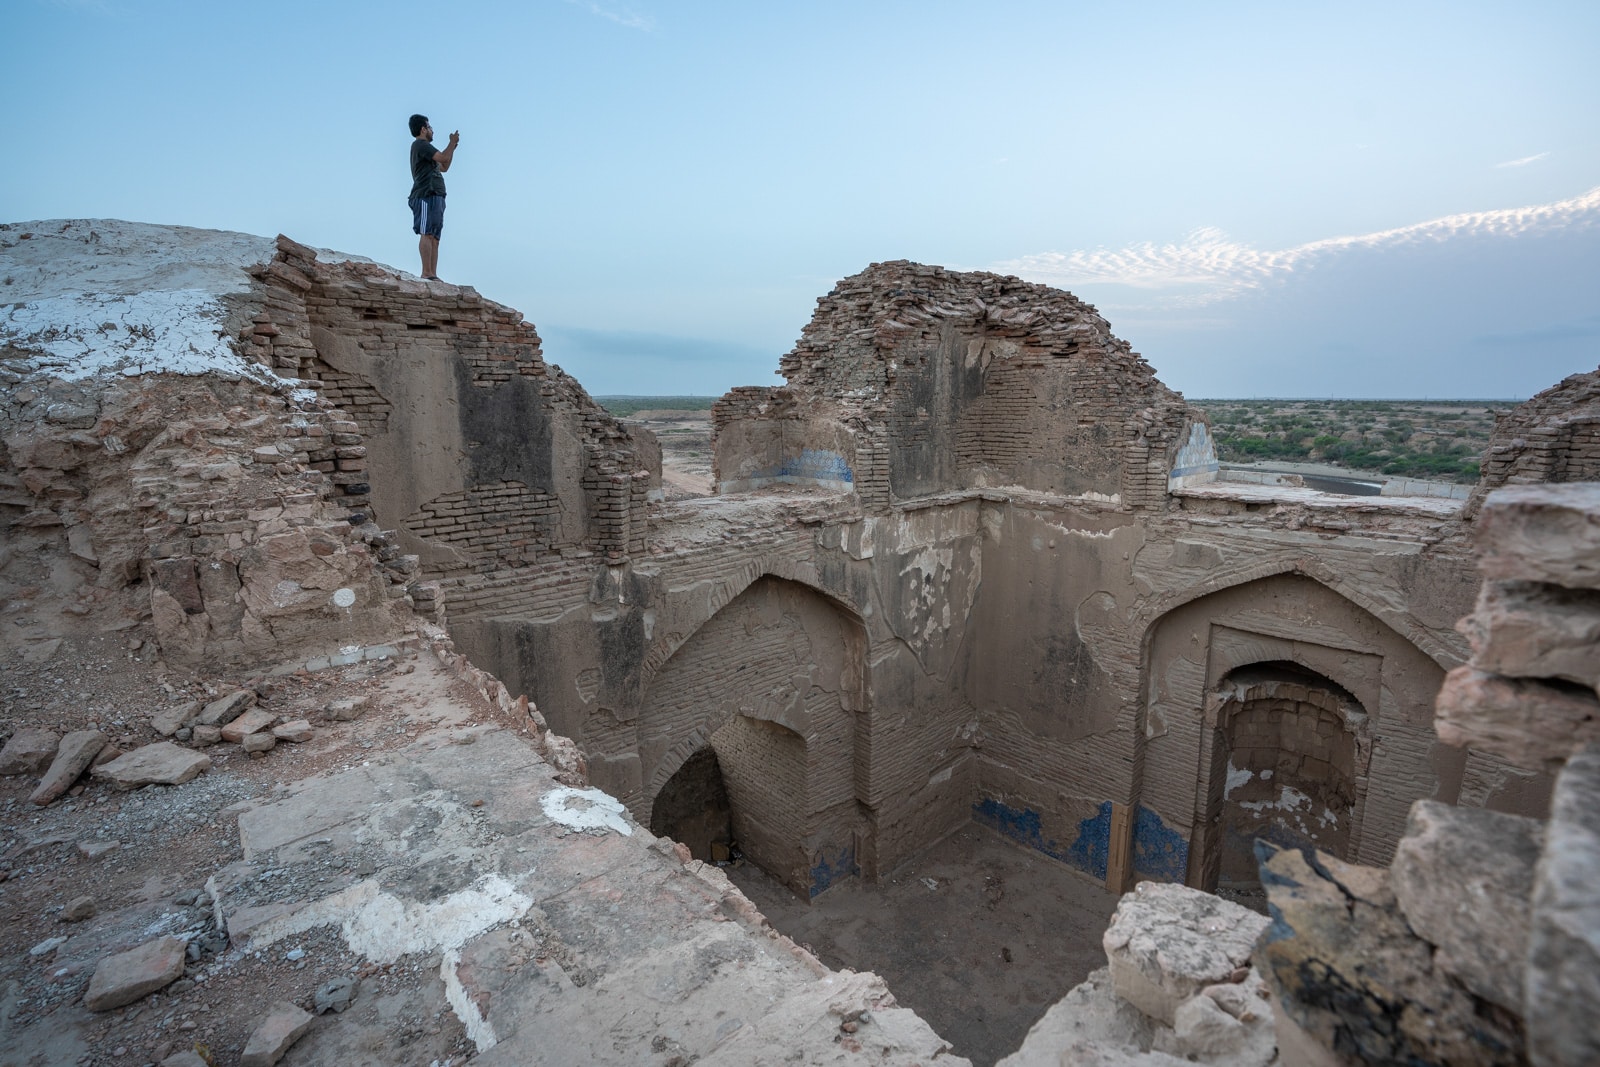 Sindh travel guide - Exploring an abandoned fort with Aamish near Thatta - Lost With Purpose travel blog